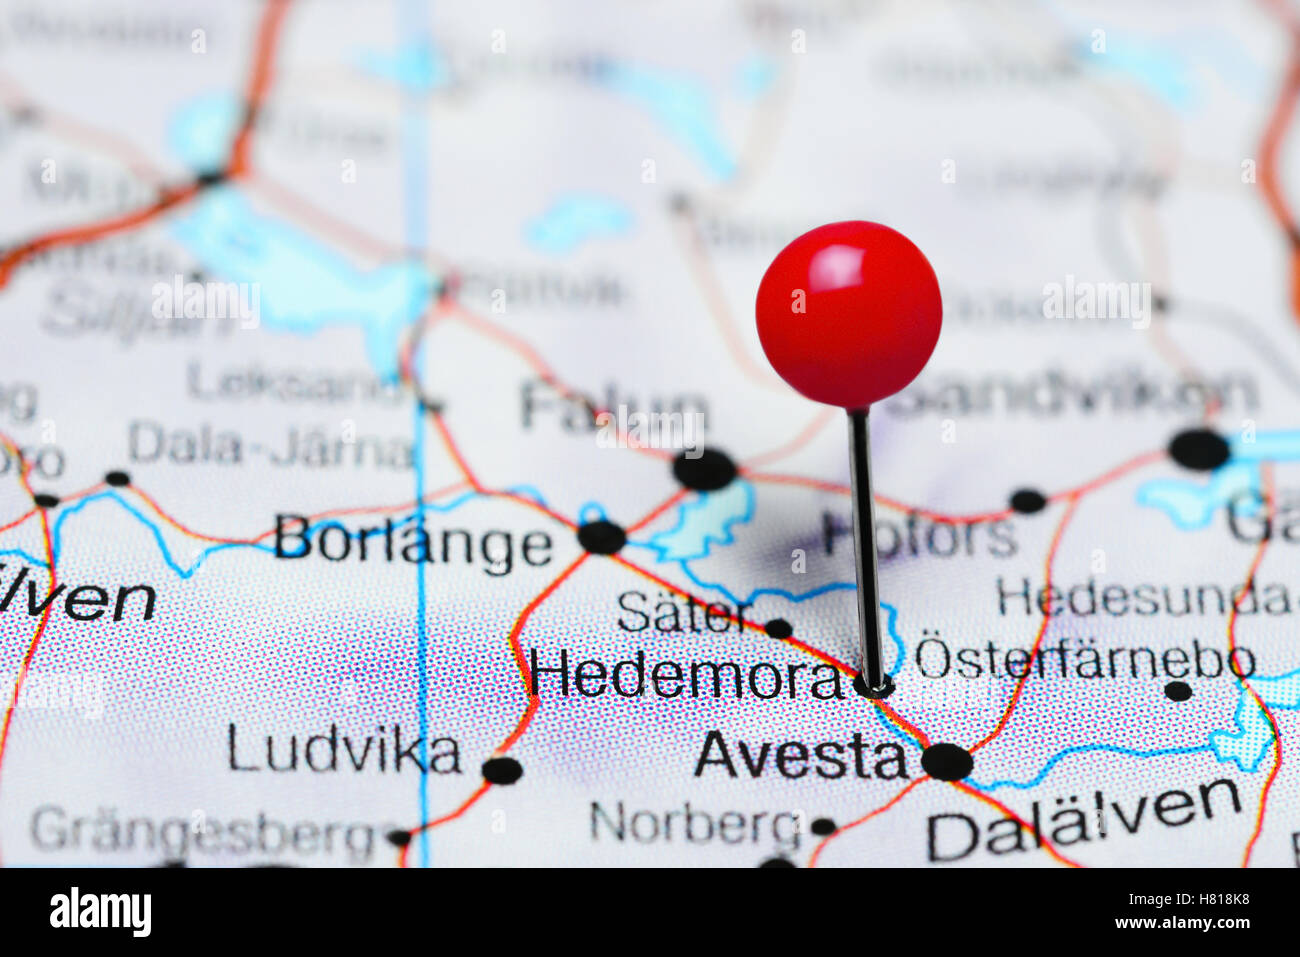 Hedemora pinned on a map of Sweden Stock Photo